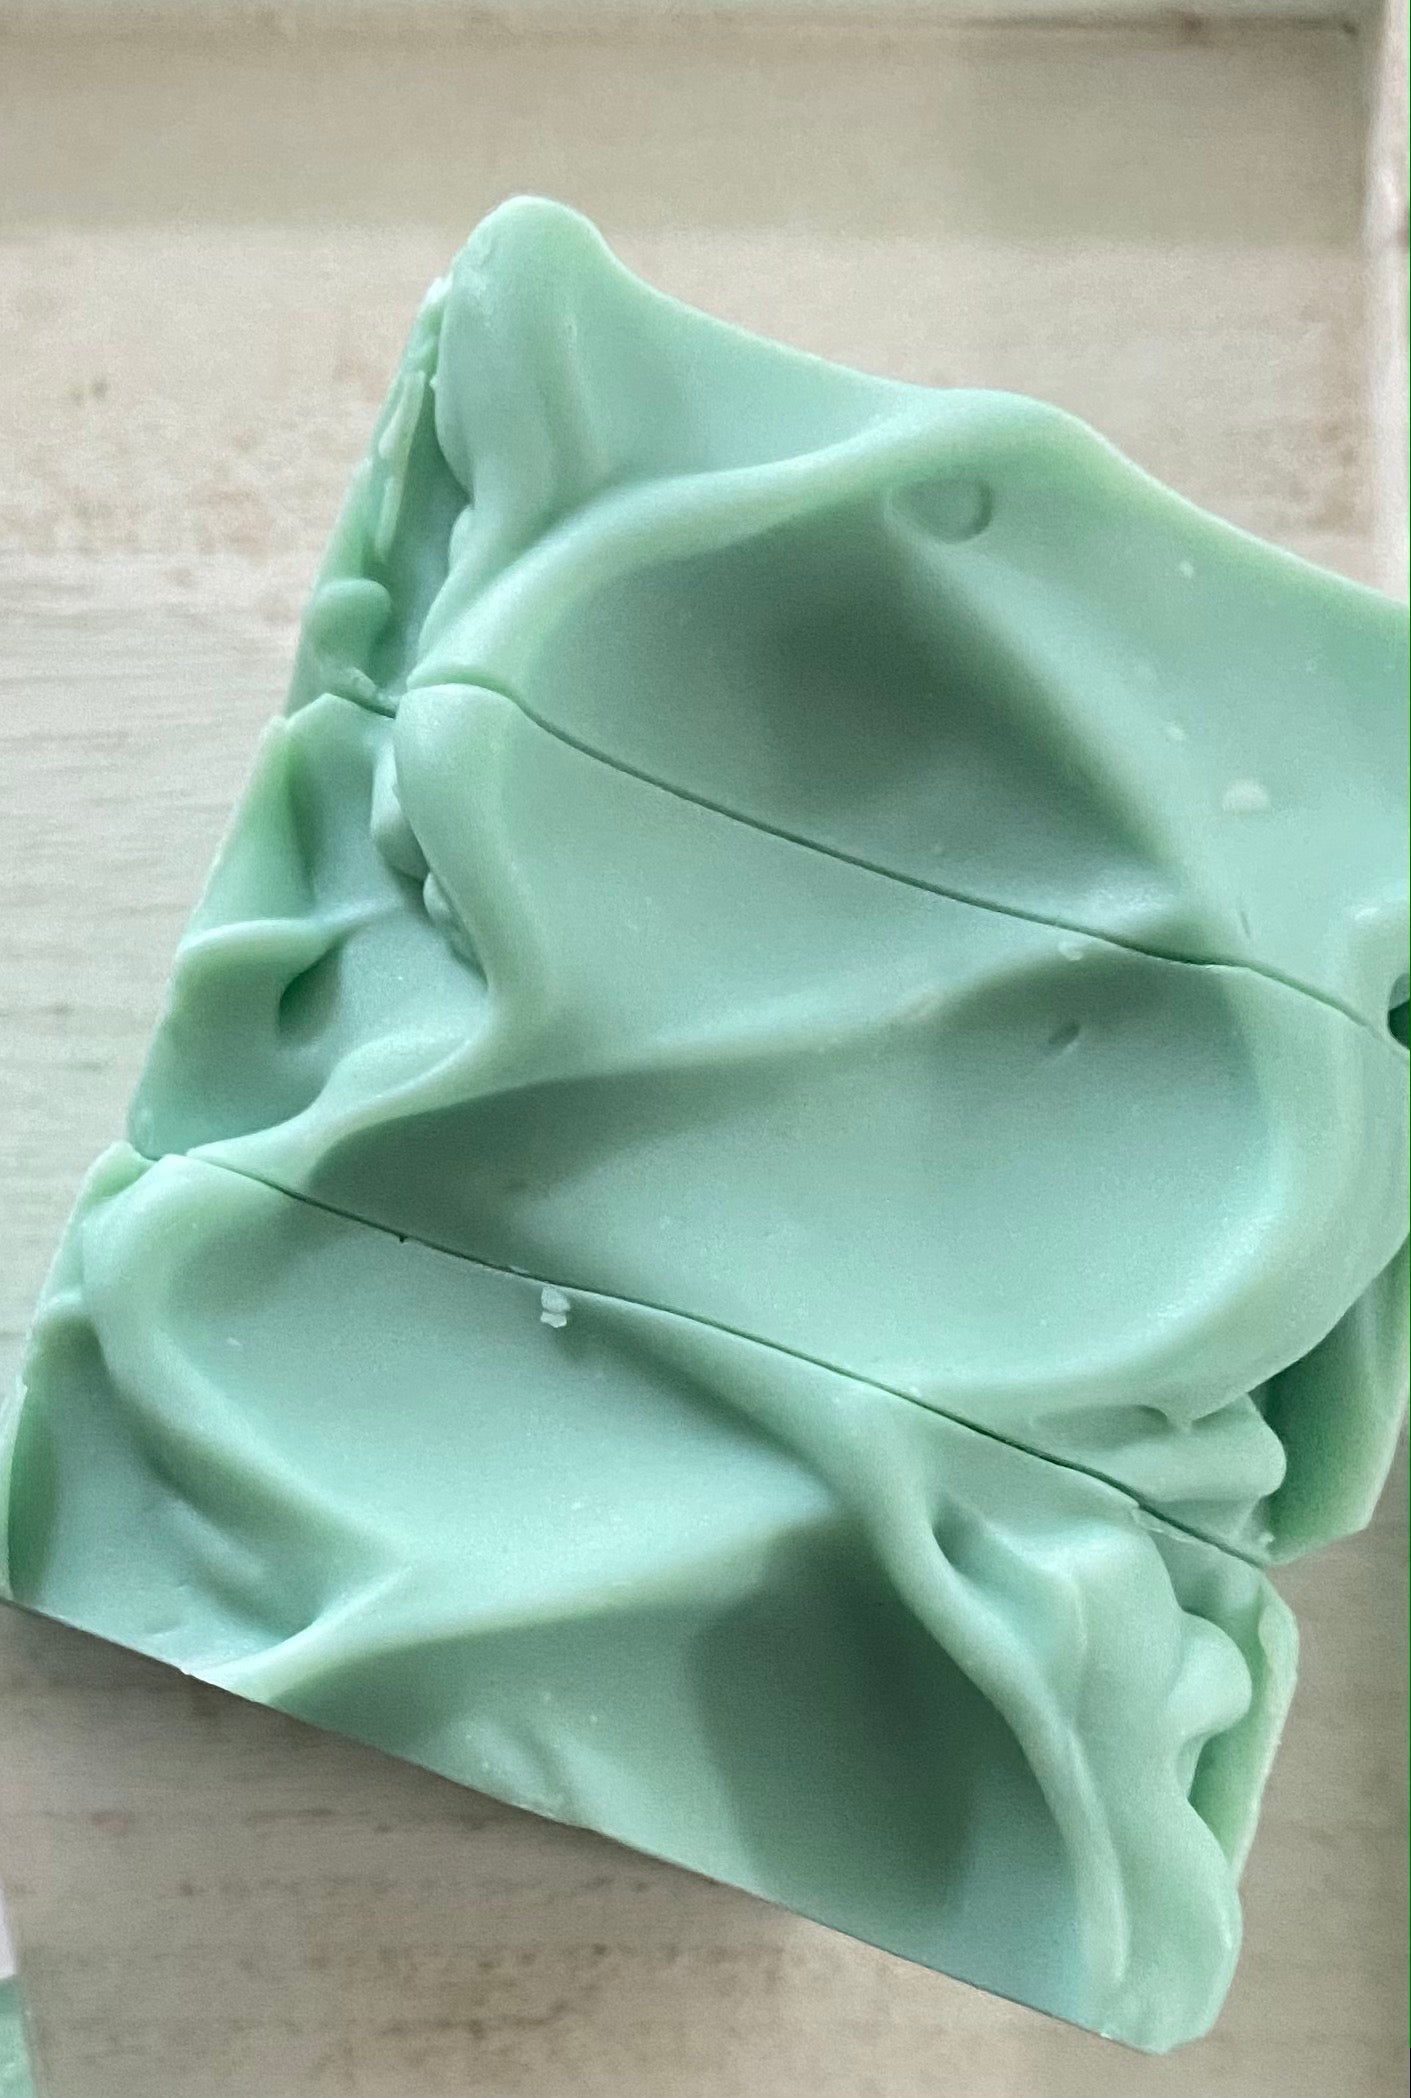 Clean Breeze Soap has a fruity floral blend of peach, watermelon, neroli and jasmine on a dry down of aquatic notes and musk. Smoothly Natural Skin 